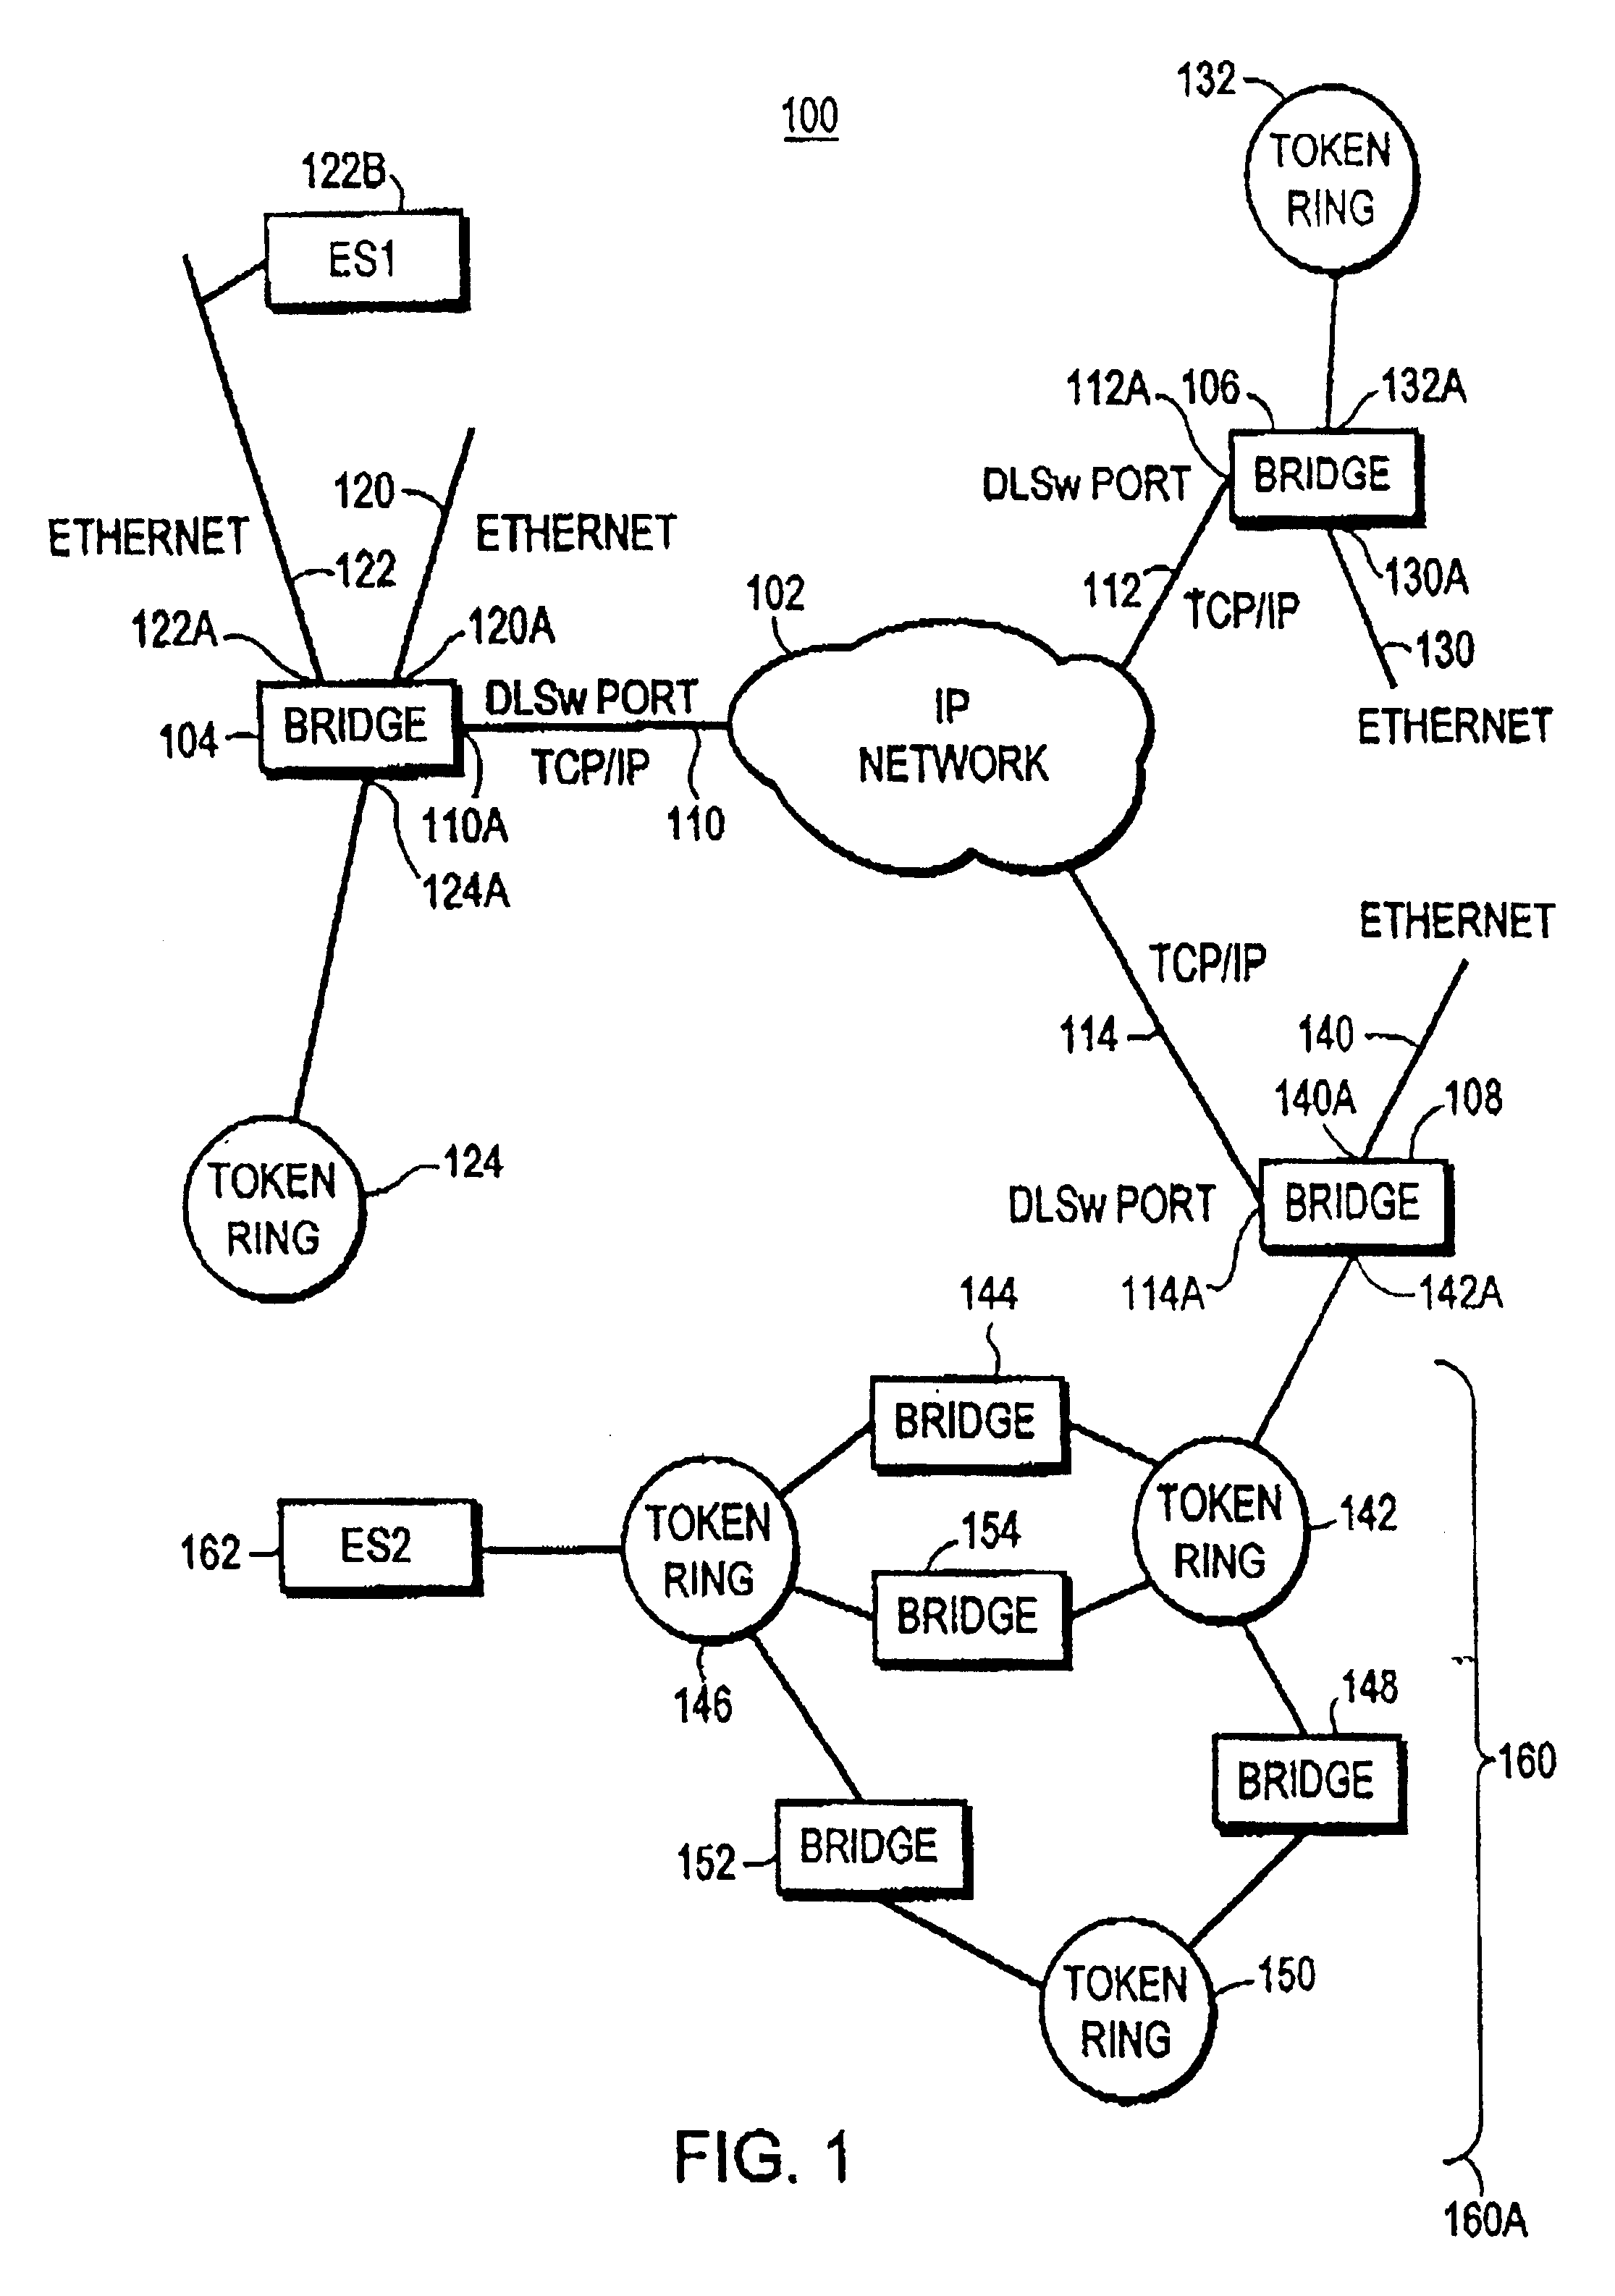 Electronic shopping assistant and method of use